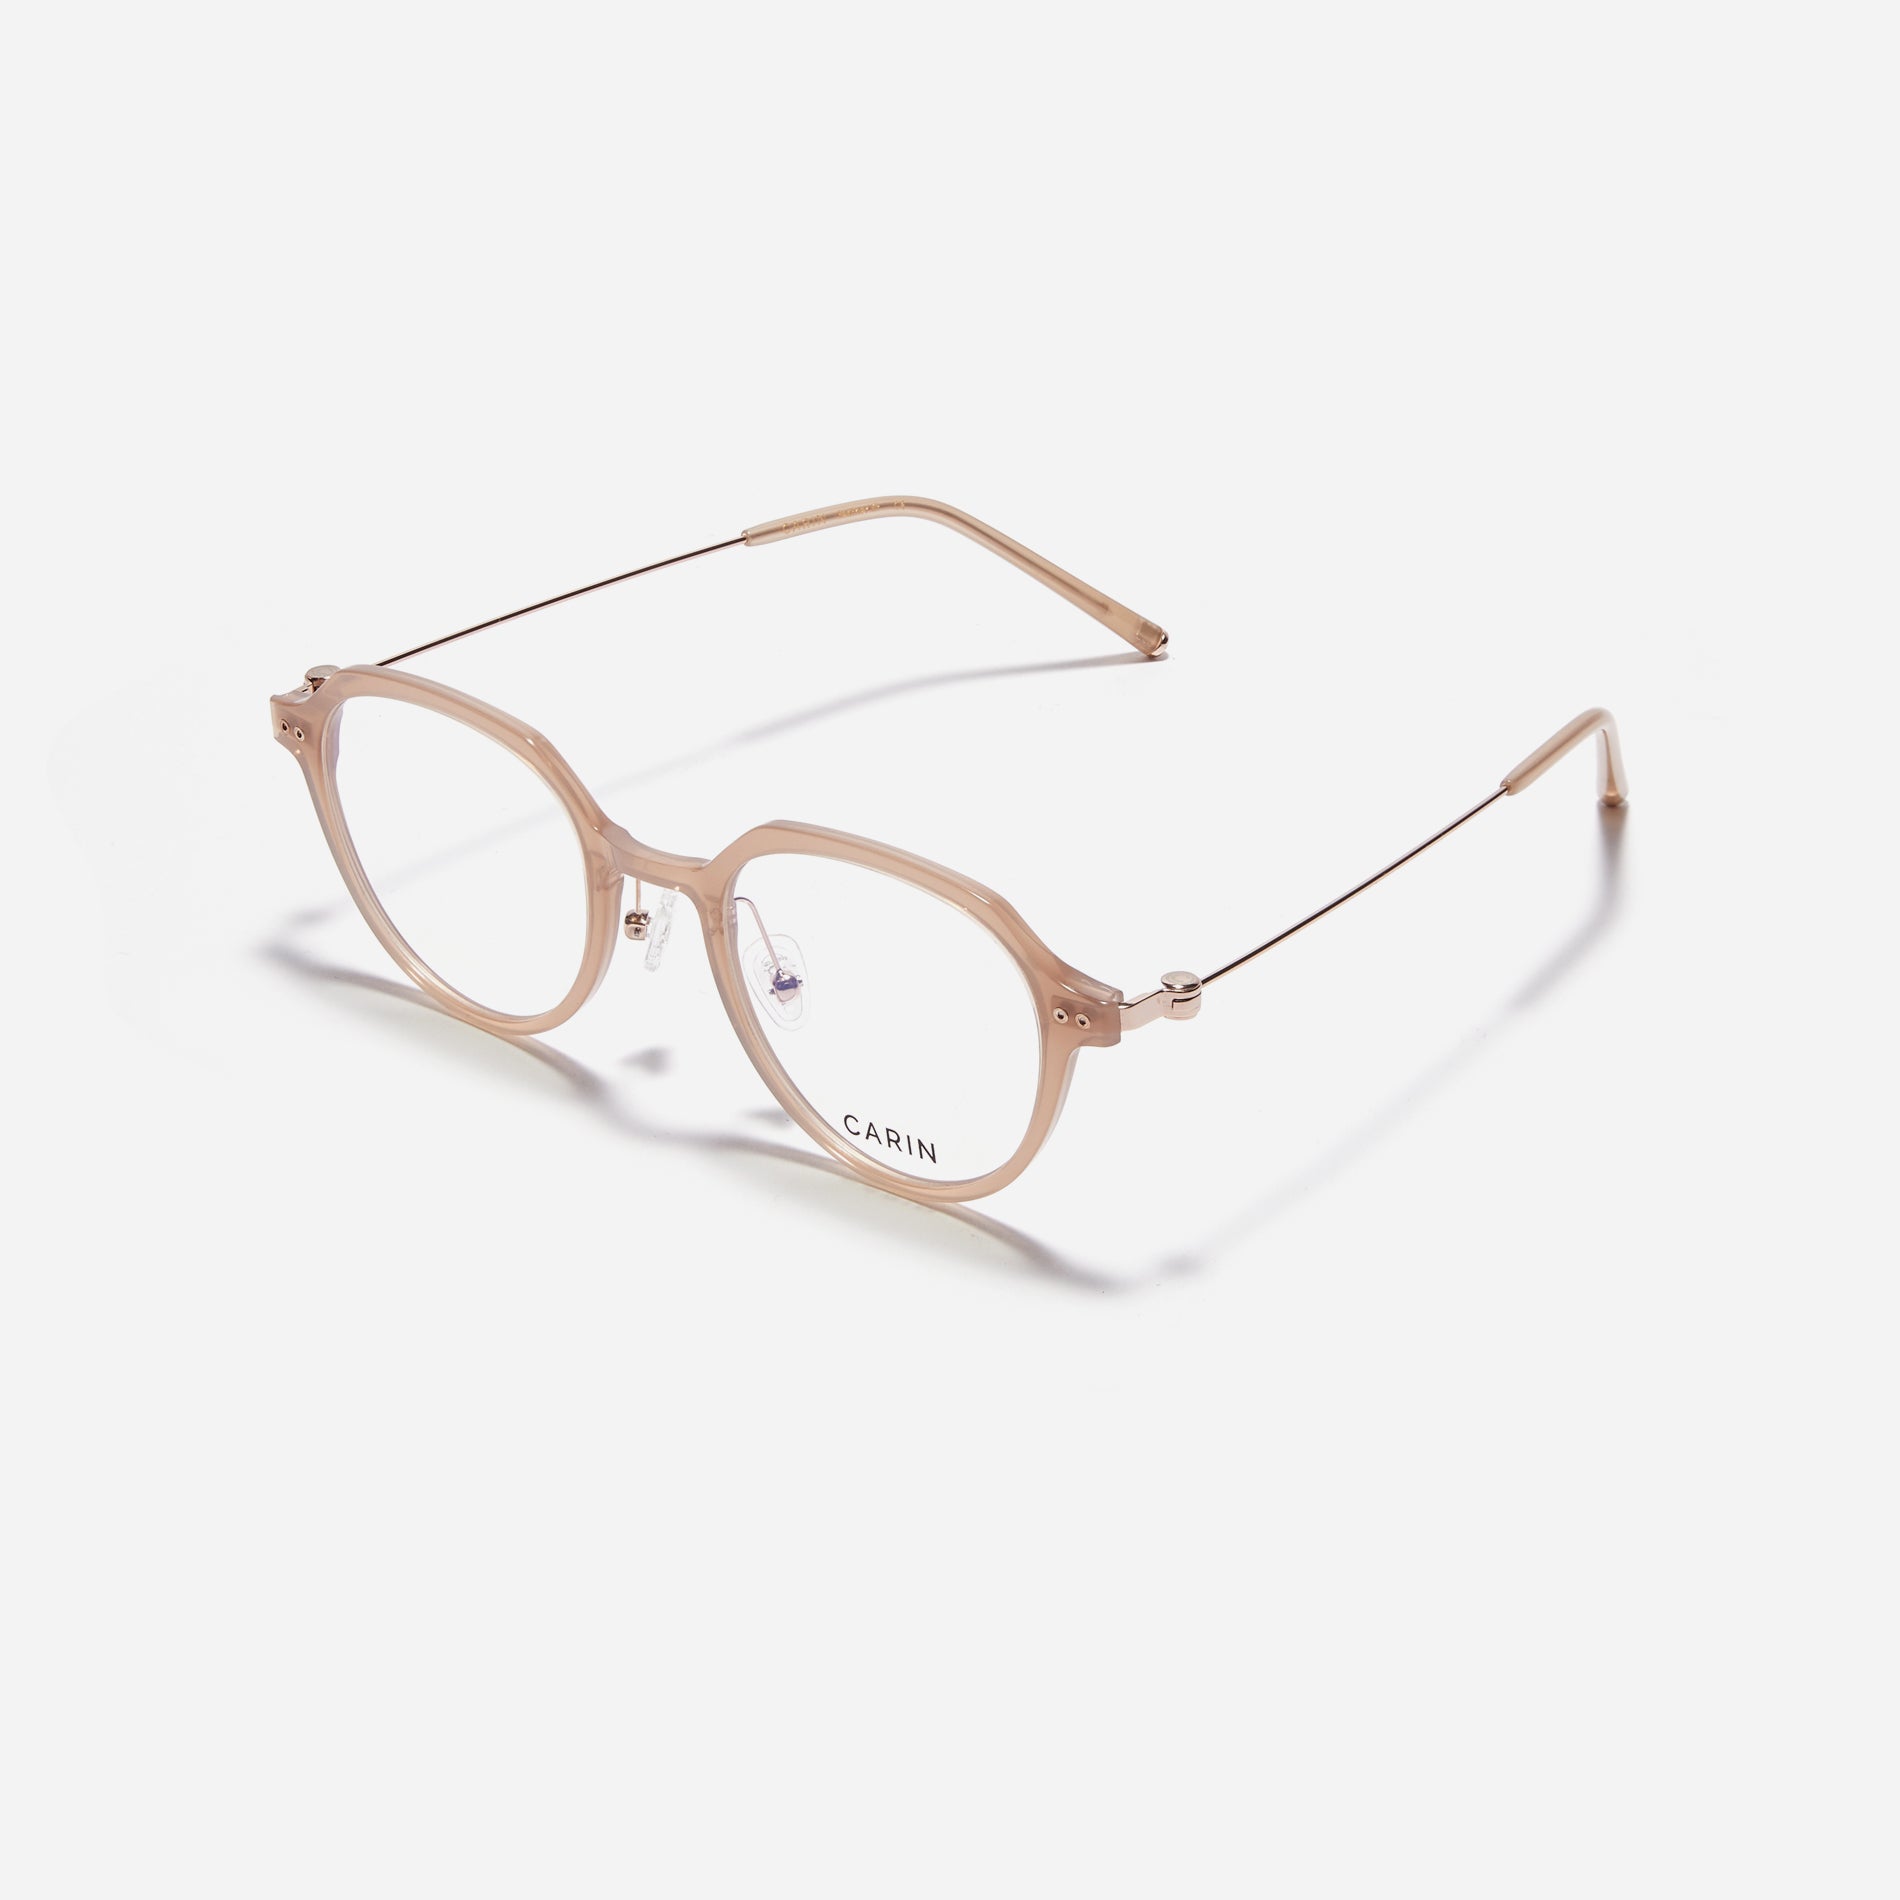 Polygonal-shaped eyeglasses crafted with a blend of G850 bio-plastic and stainless steel, ensuring resilience against breakage. Incorporated with CARIN's patented anti-loosening hinge technology, these eyeglasses ensure a consistently comfortable fit.